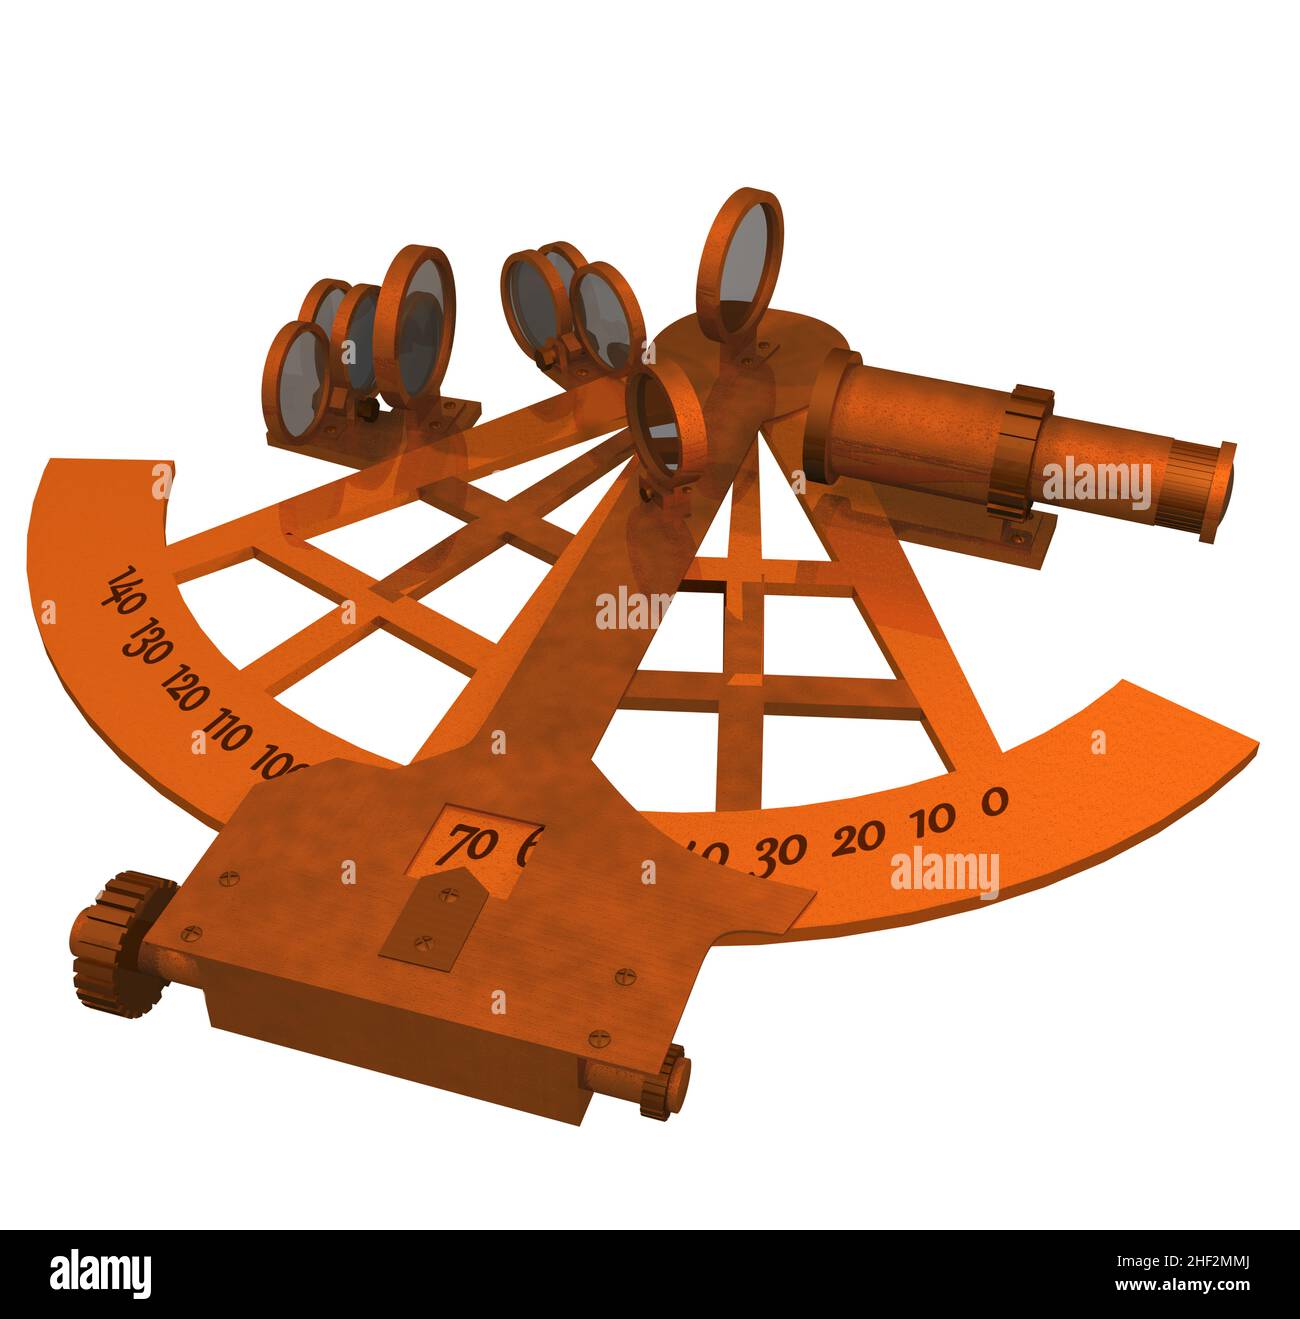 3D Rendering Illustration of an Antique Sextant. Stock Photo